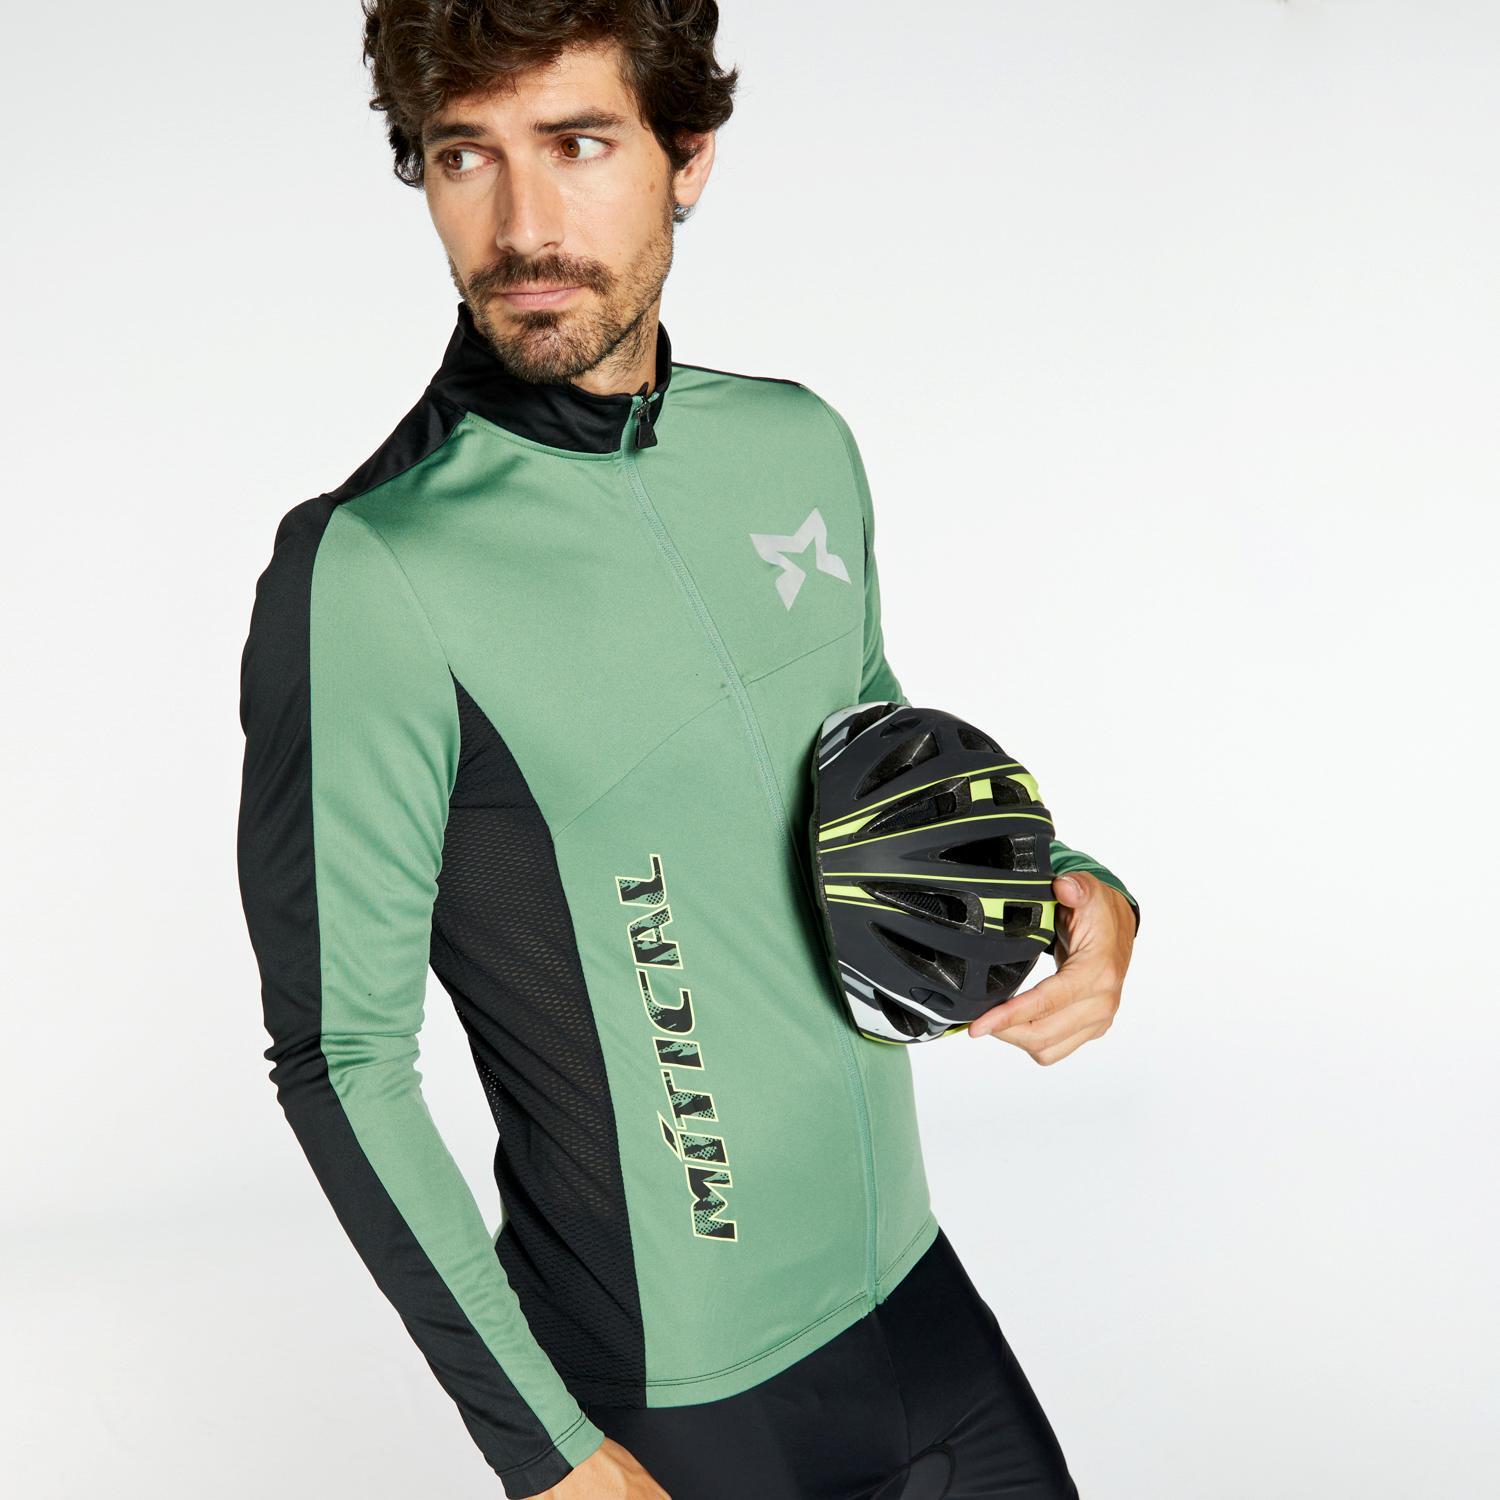 Mitical Plata - Vert - Maillot Cyclisme Homme sports taille S